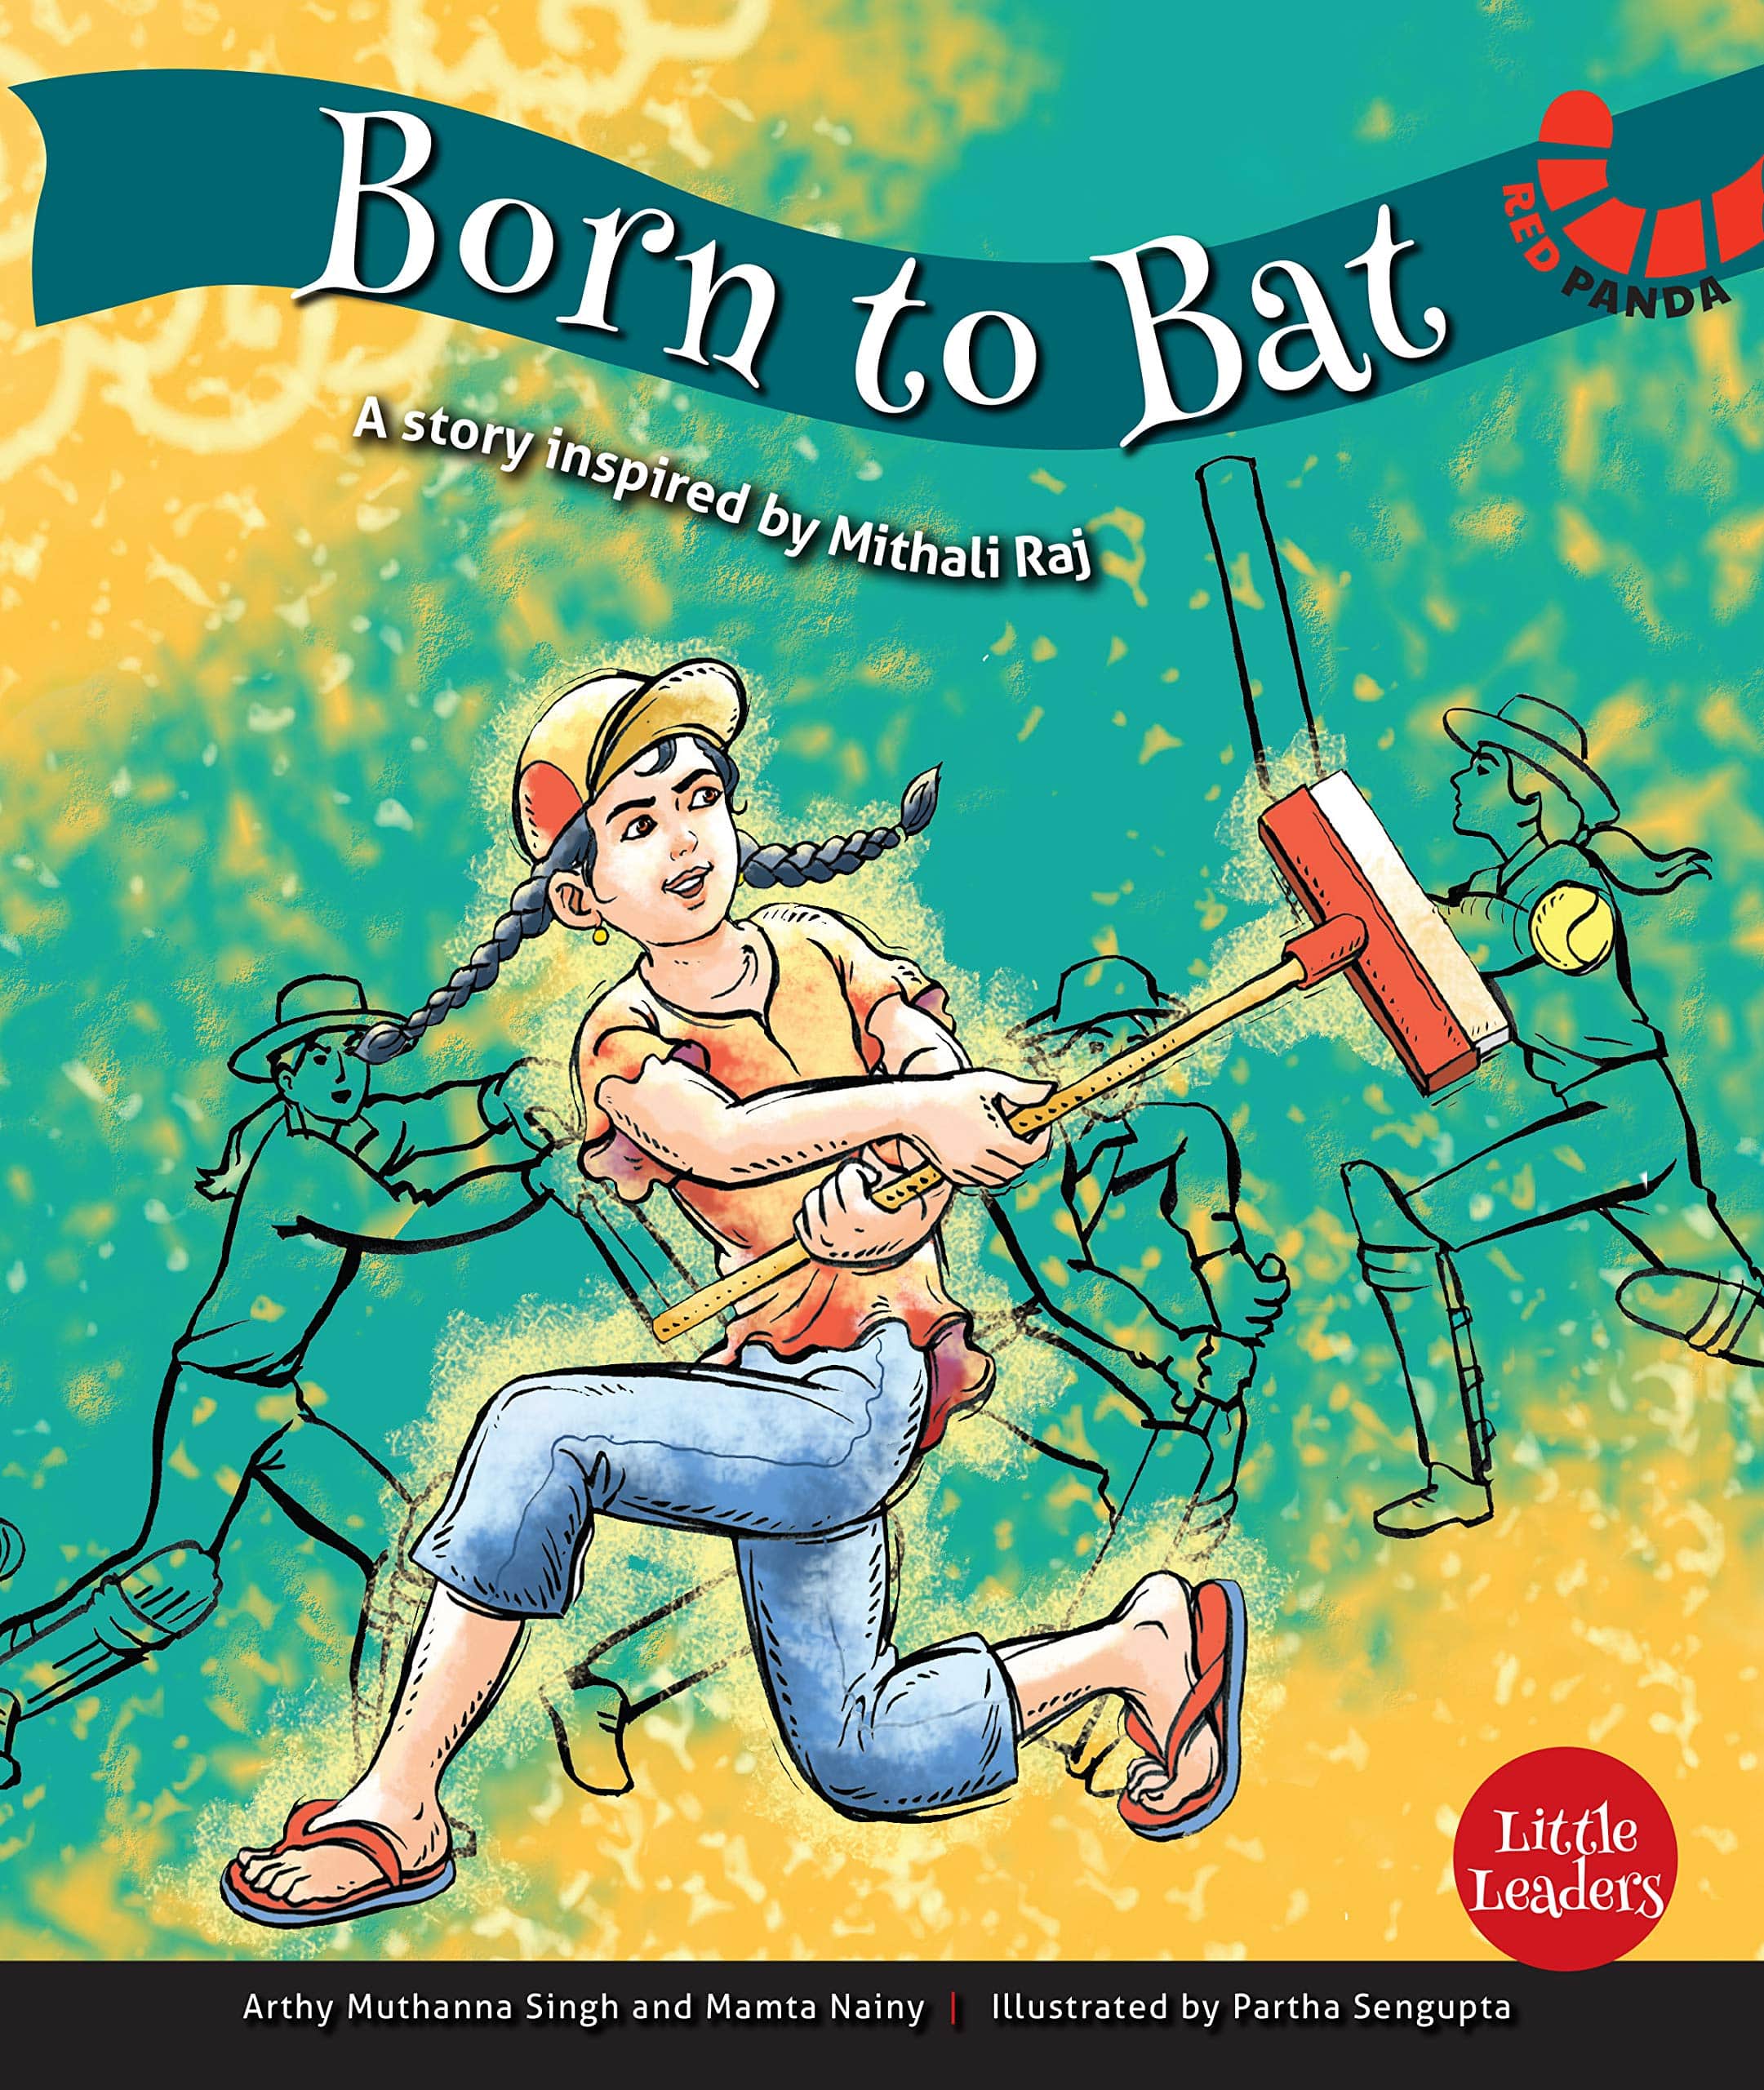 IMG : Little Leaders Born To Bat. Story inspired by Mithili Raj